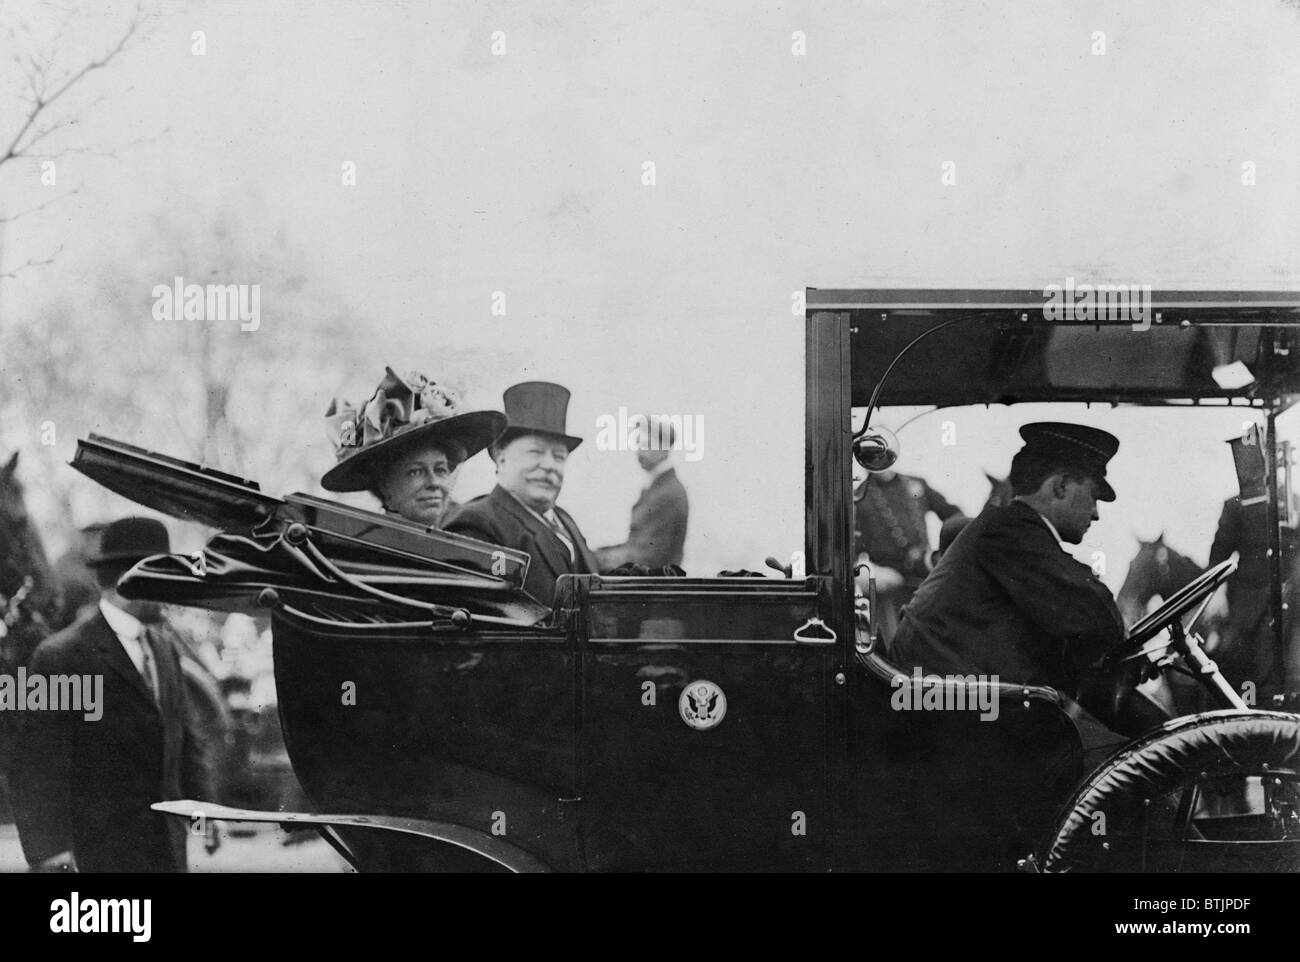 President William Taft (1857-1930) and First Lady, Helen Taft, seated in the back of an open convertible automobile in 1909. Stock Photo